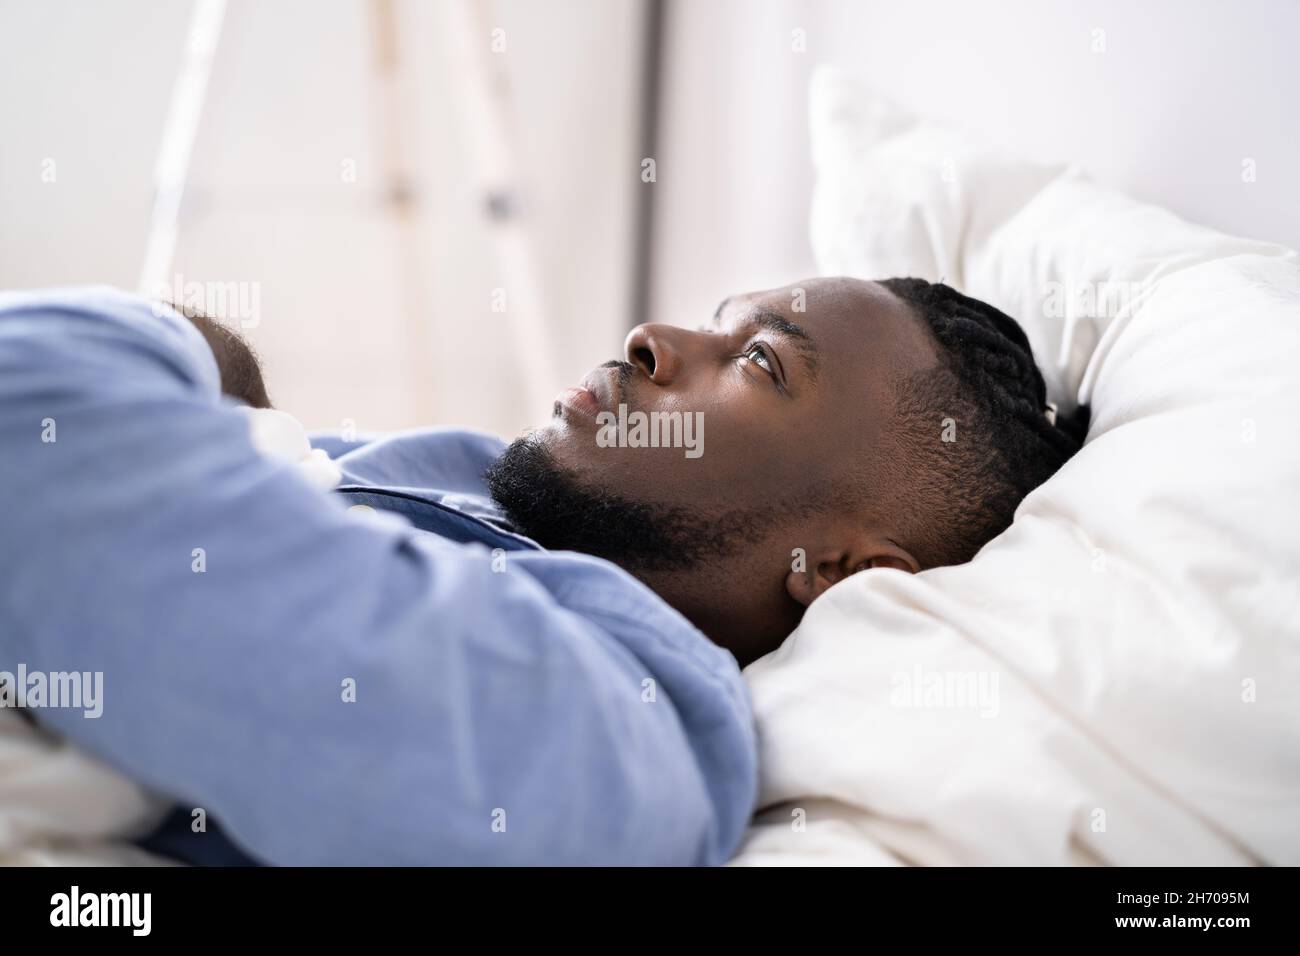 Young Man Suffering From Insomnia Lying In His Bed Stock Photo